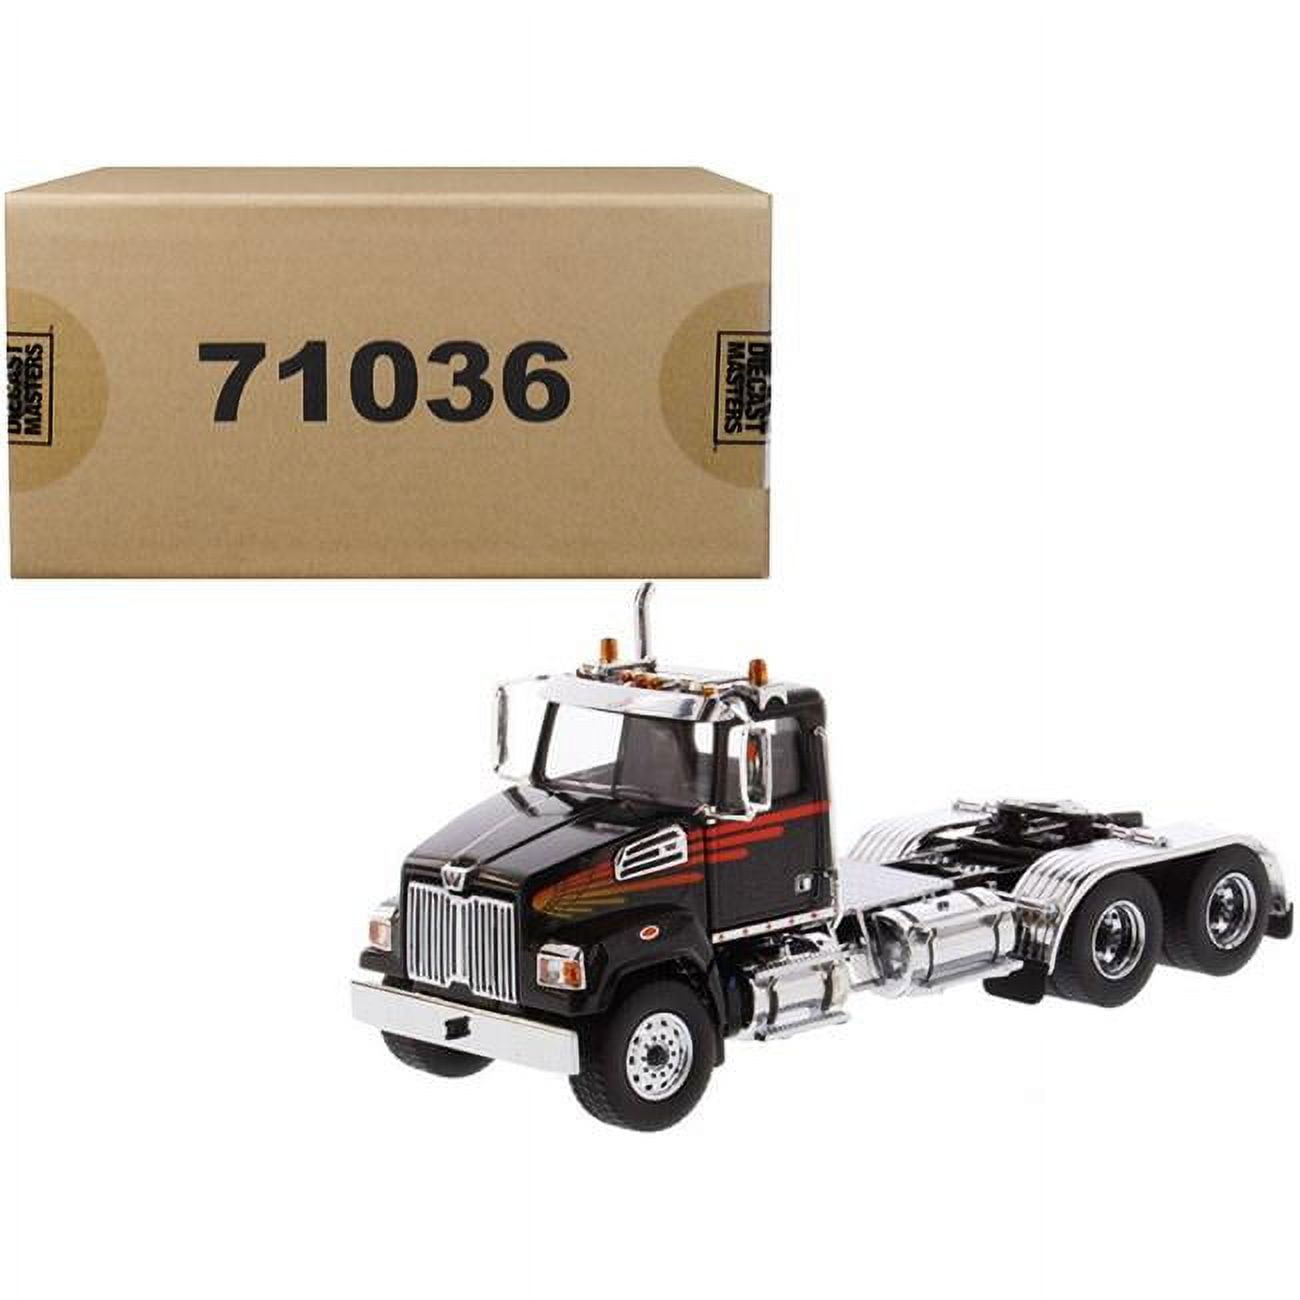 71036 1 By 50 Diecast Scale Day Cab Tractor For Western Star 4700 Sf Tandem Model, Metallic Red & Silver